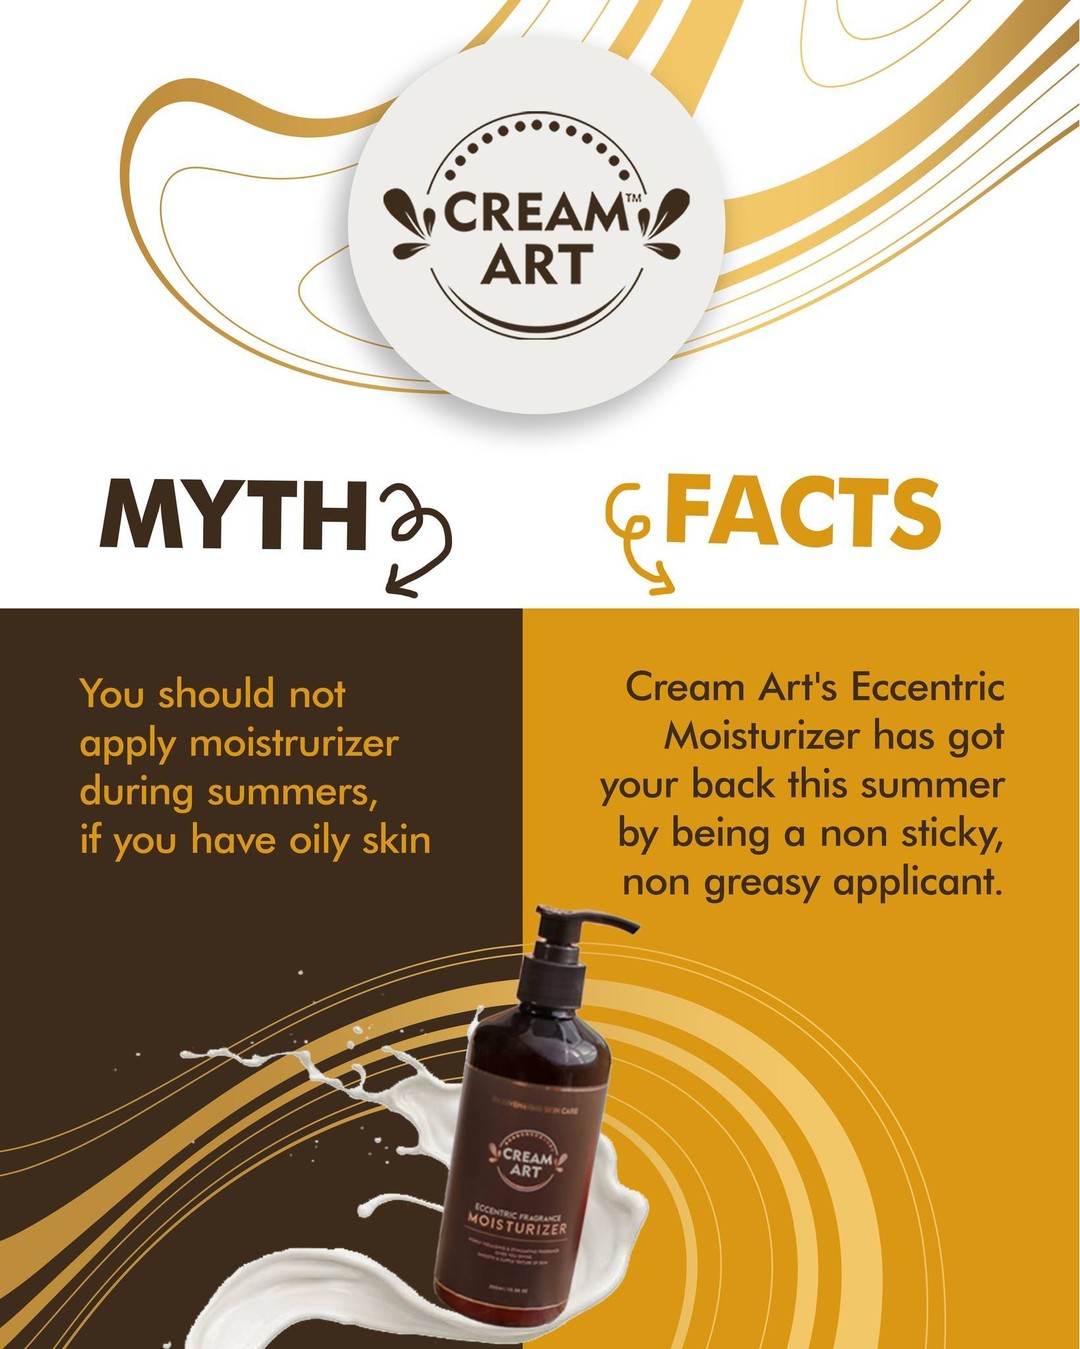 Are your happy summer days ruined by these baseless myths? Don’t worry, Cream Art got you covered!! Cream Art's Eccentric Fragrance Moisturizer has a self tanner that can work with any skin tone and type. It provides the right amount of hydration to your skin!!

#eccentricfragrancemoisturizer
#hydratedskin
#selftanner
#creamart